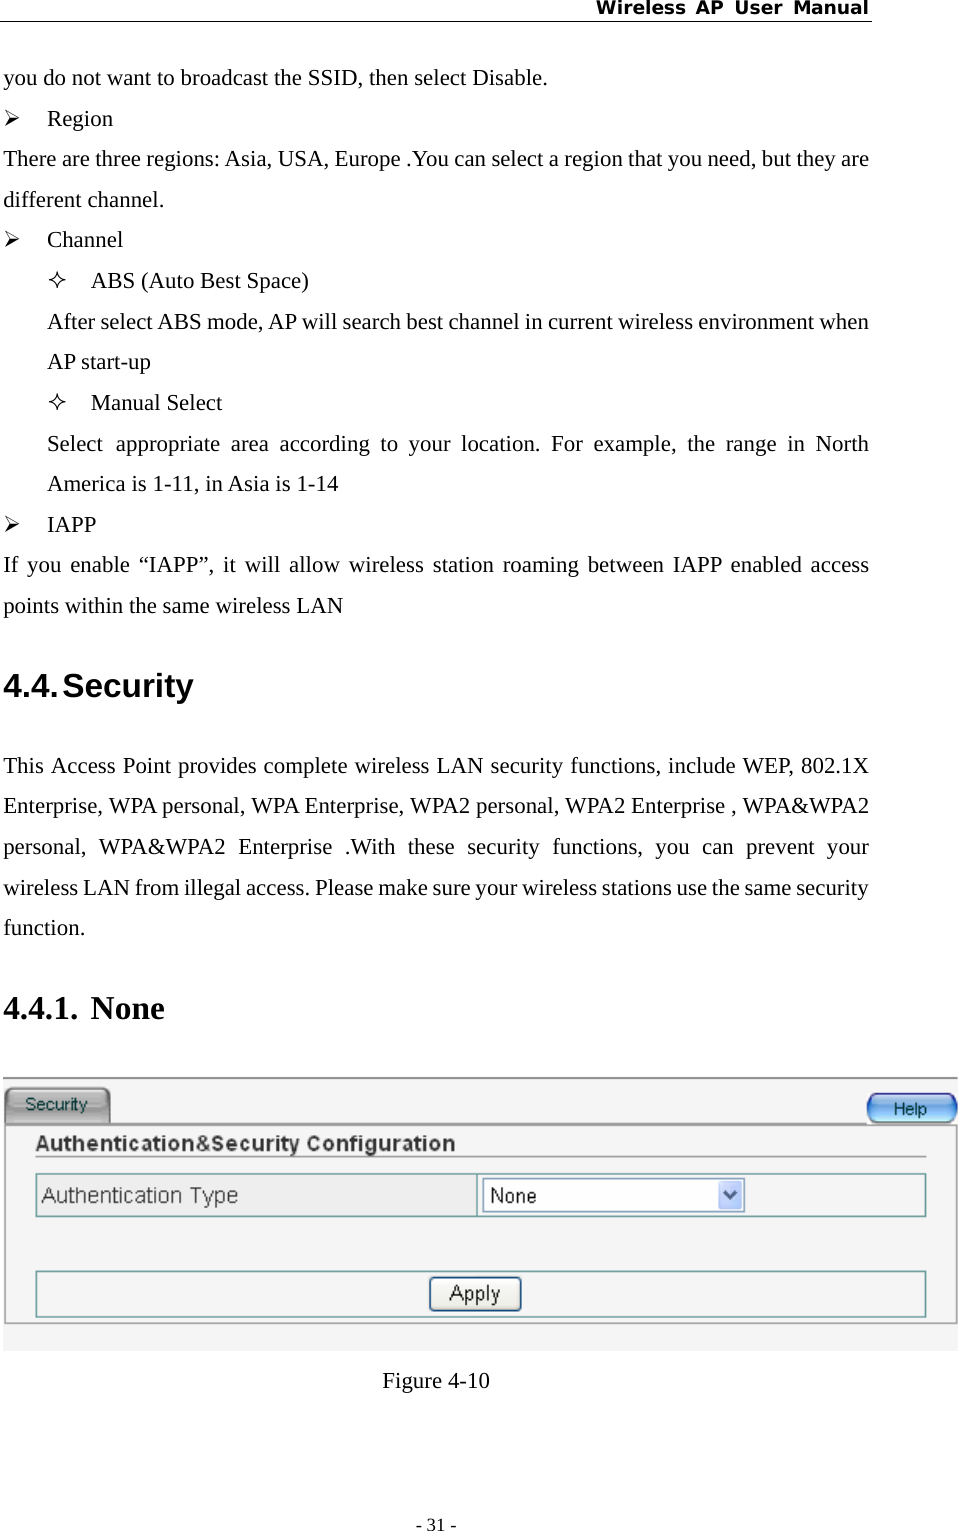 Wireless AP User Manual - 31 -  you do not want to broadcast the SSID, then select Disable. ¾ Region There are three regions: Asia, USA, Europe .You can select a region that you need, but they are different channel. ¾ Channel  ABS (Auto Best Space) After select ABS mode, AP will search best channel in current wireless environment when AP start-up  Manual Select Select appropriate area according to your location. For example, the range in North America is 1-11, in Asia is 1-14 ¾ IAPP If you enable “IAPP”, it will allow wireless station roaming between IAPP enabled access points within the same wireless LAN 4.4. Security This Access Point provides complete wireless LAN security functions, include WEP, 802.1X Enterprise, WPA personal, WPA Enterprise, WPA2 personal, WPA2 Enterprise , WPA&amp;WPA2 personal, WPA&amp;WPA2 Enterprise .With these security functions, you can prevent your wireless LAN from illegal access. Please make sure your wireless stations use the same security function. 4.4.1. None  Figure 4-10 